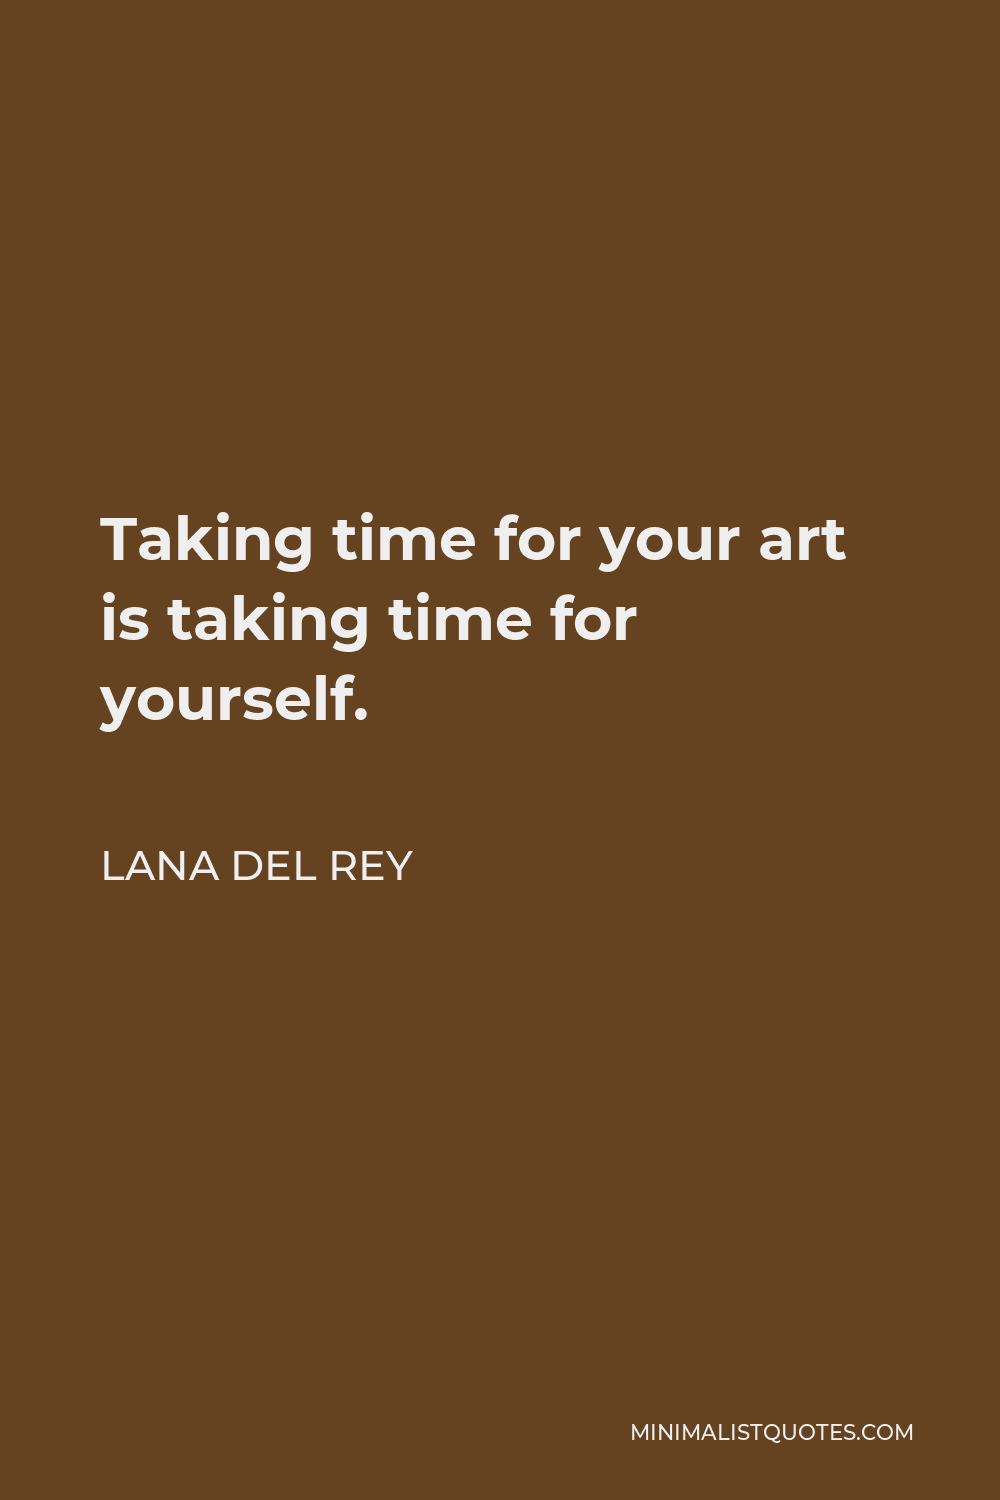 Lana Del Rey Quote - Taking time for your art is taking time for yourself.